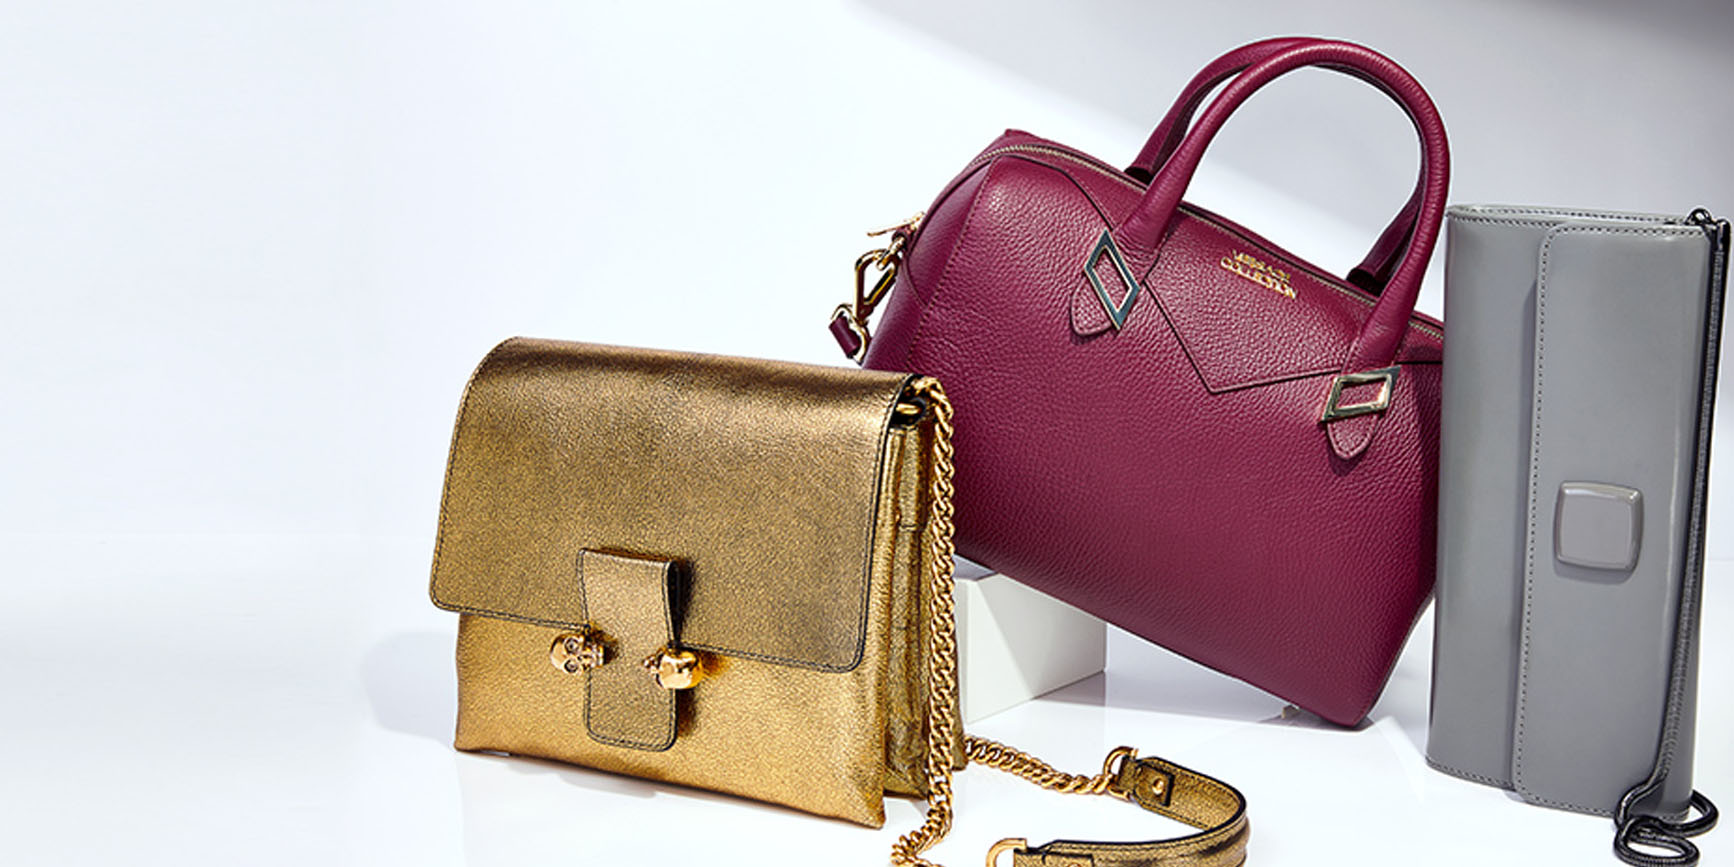 Nordstrom Rack&#39;s Designer Sale takes up to 60% off handbags, shoes, clothing & more - 9to5Toys